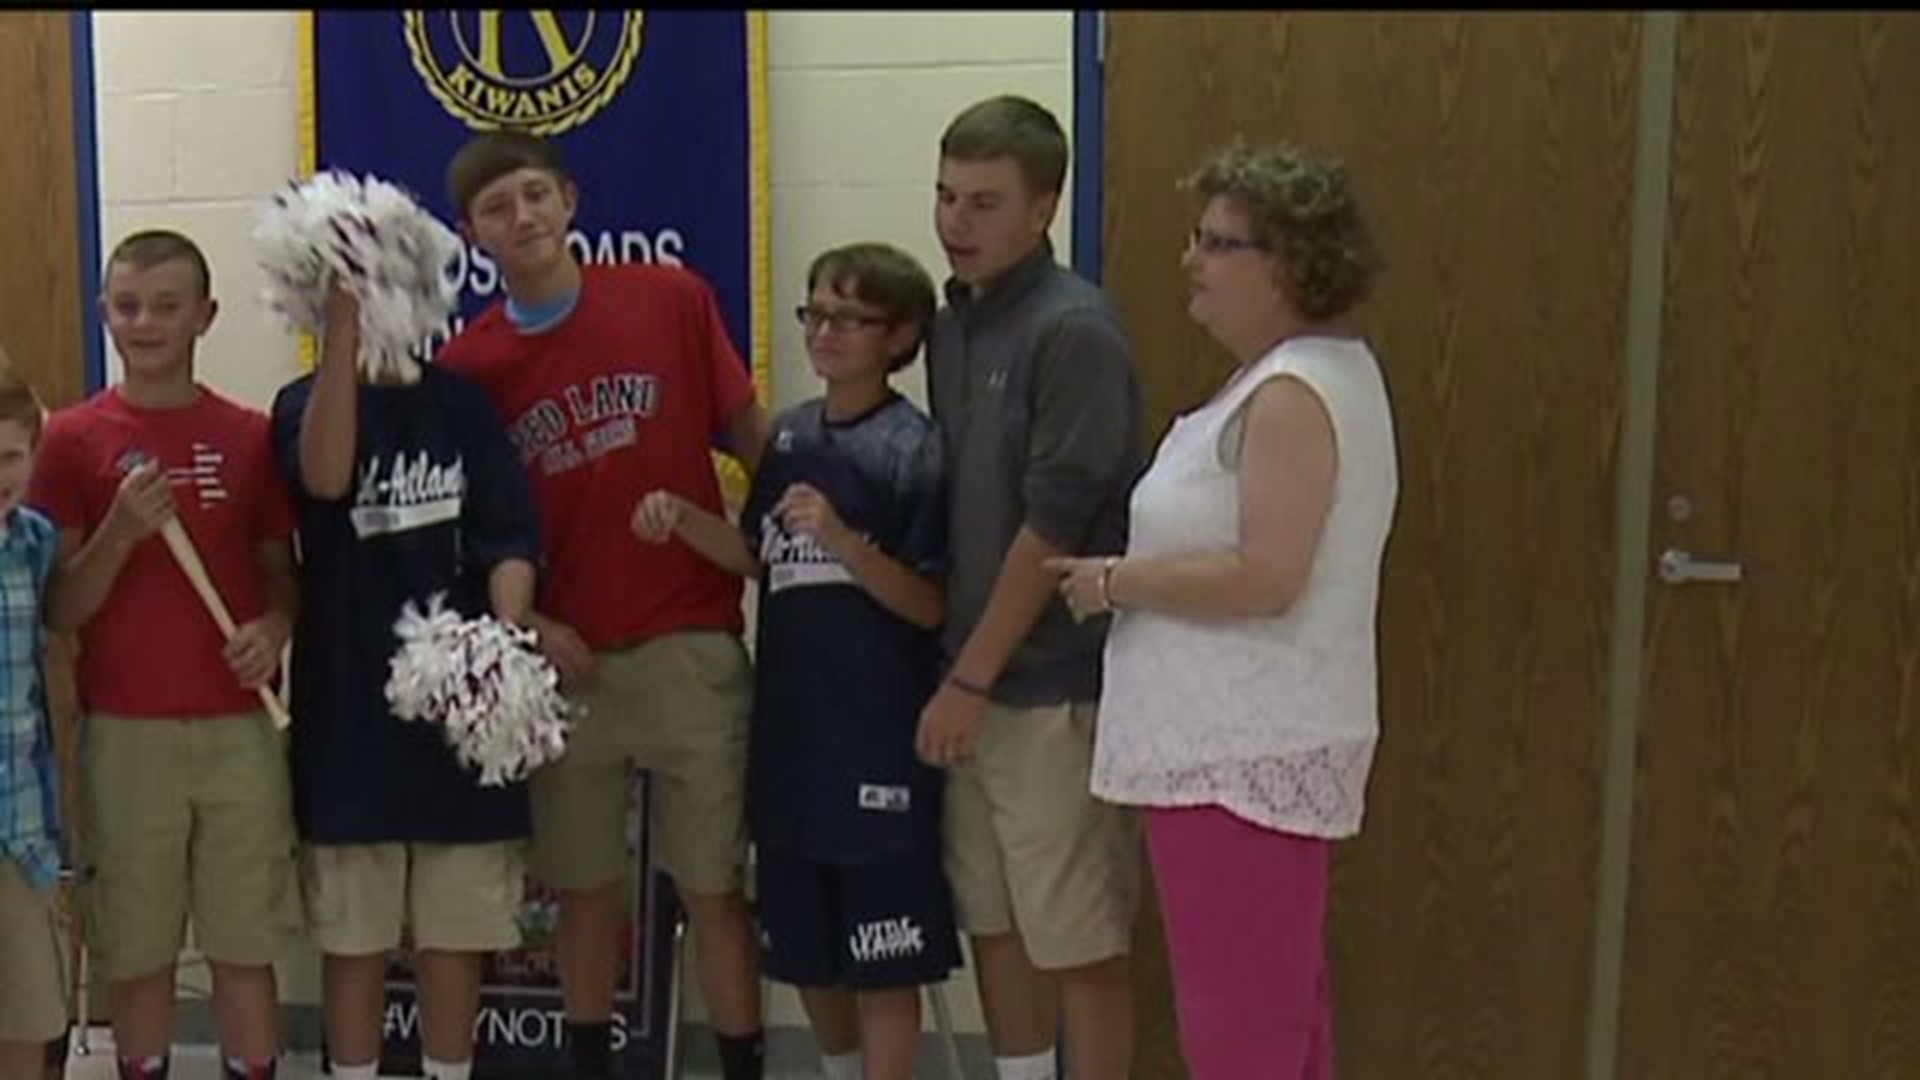 Crossroads Middle School Students return to school beaming with Red Land pride